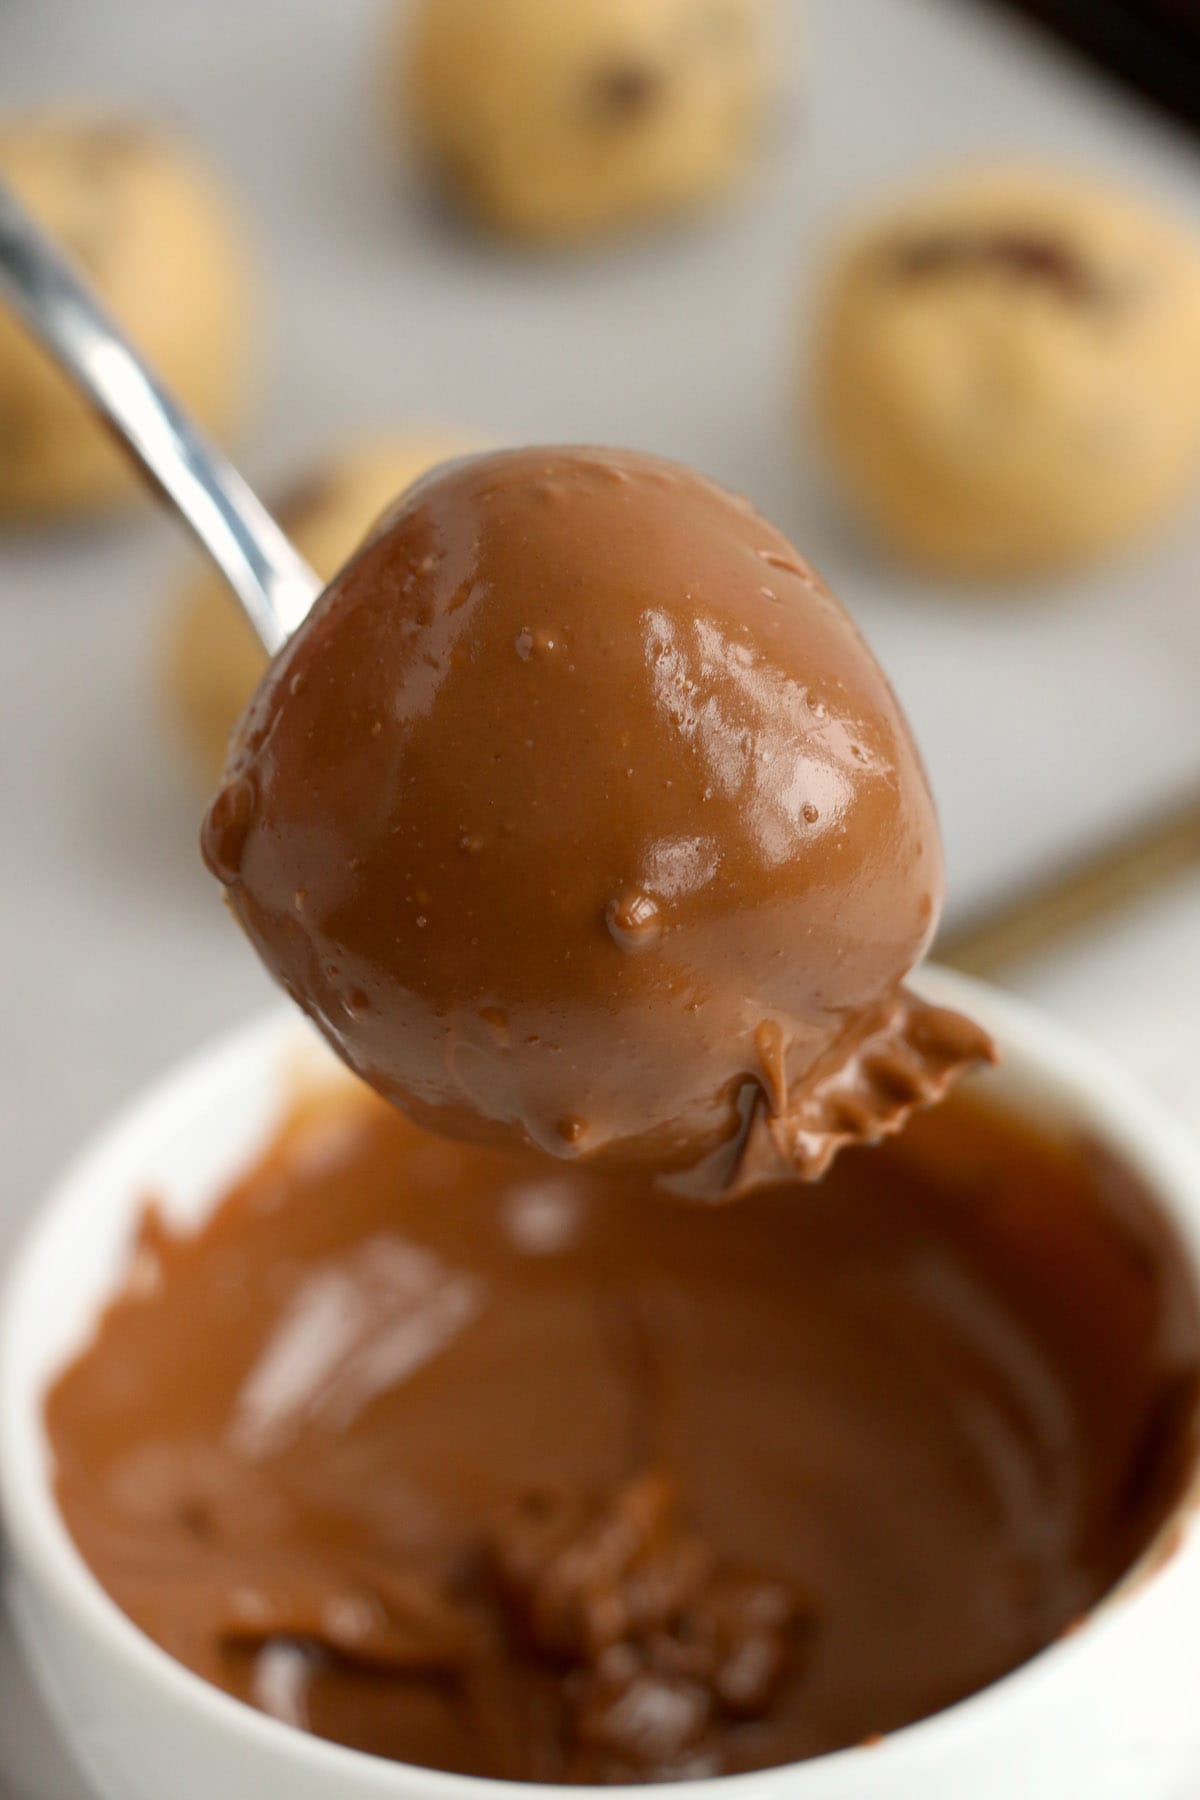 dip the balls into the melted chocolate